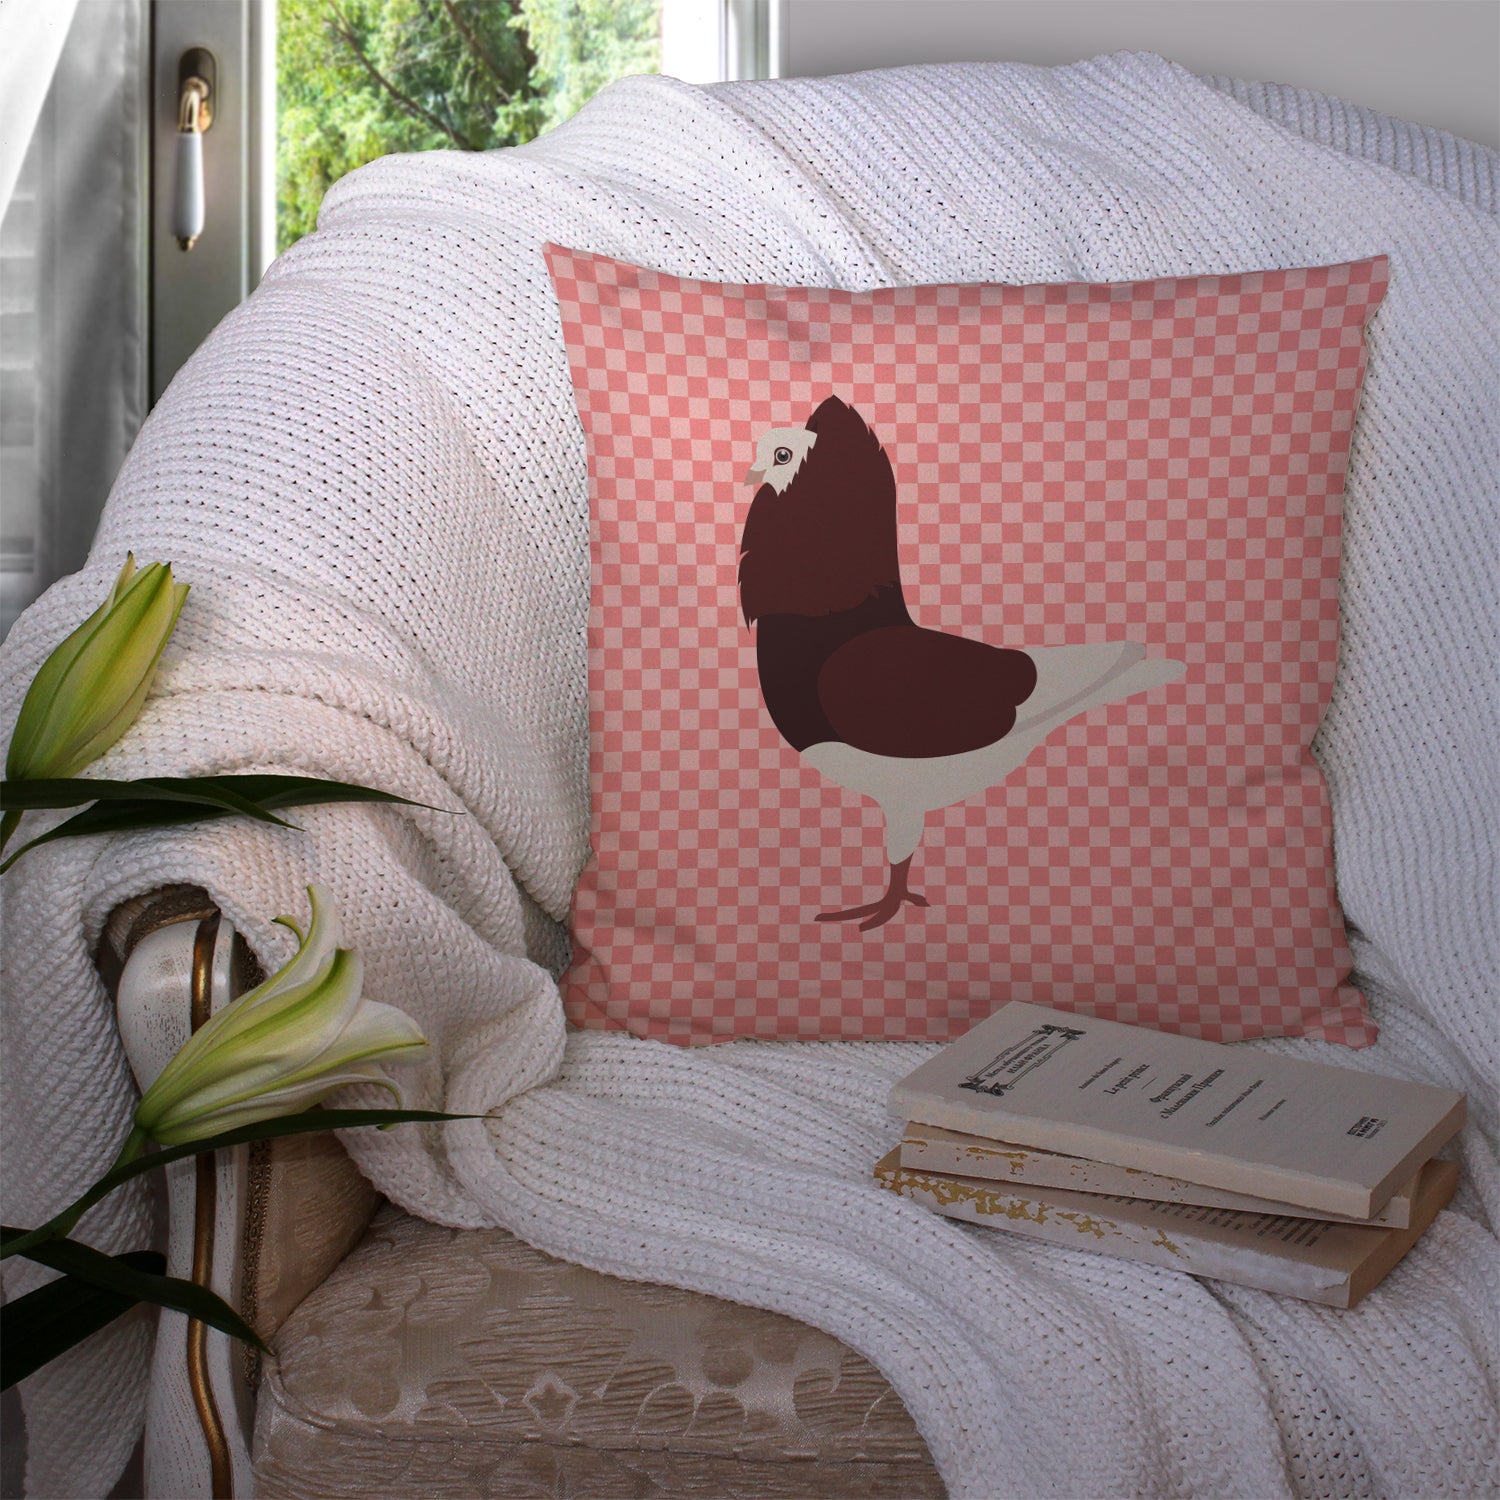 Capuchin Red Pigeon Pink Check Fabric Decorative Pillow BB7948PW1414 - the-store.com